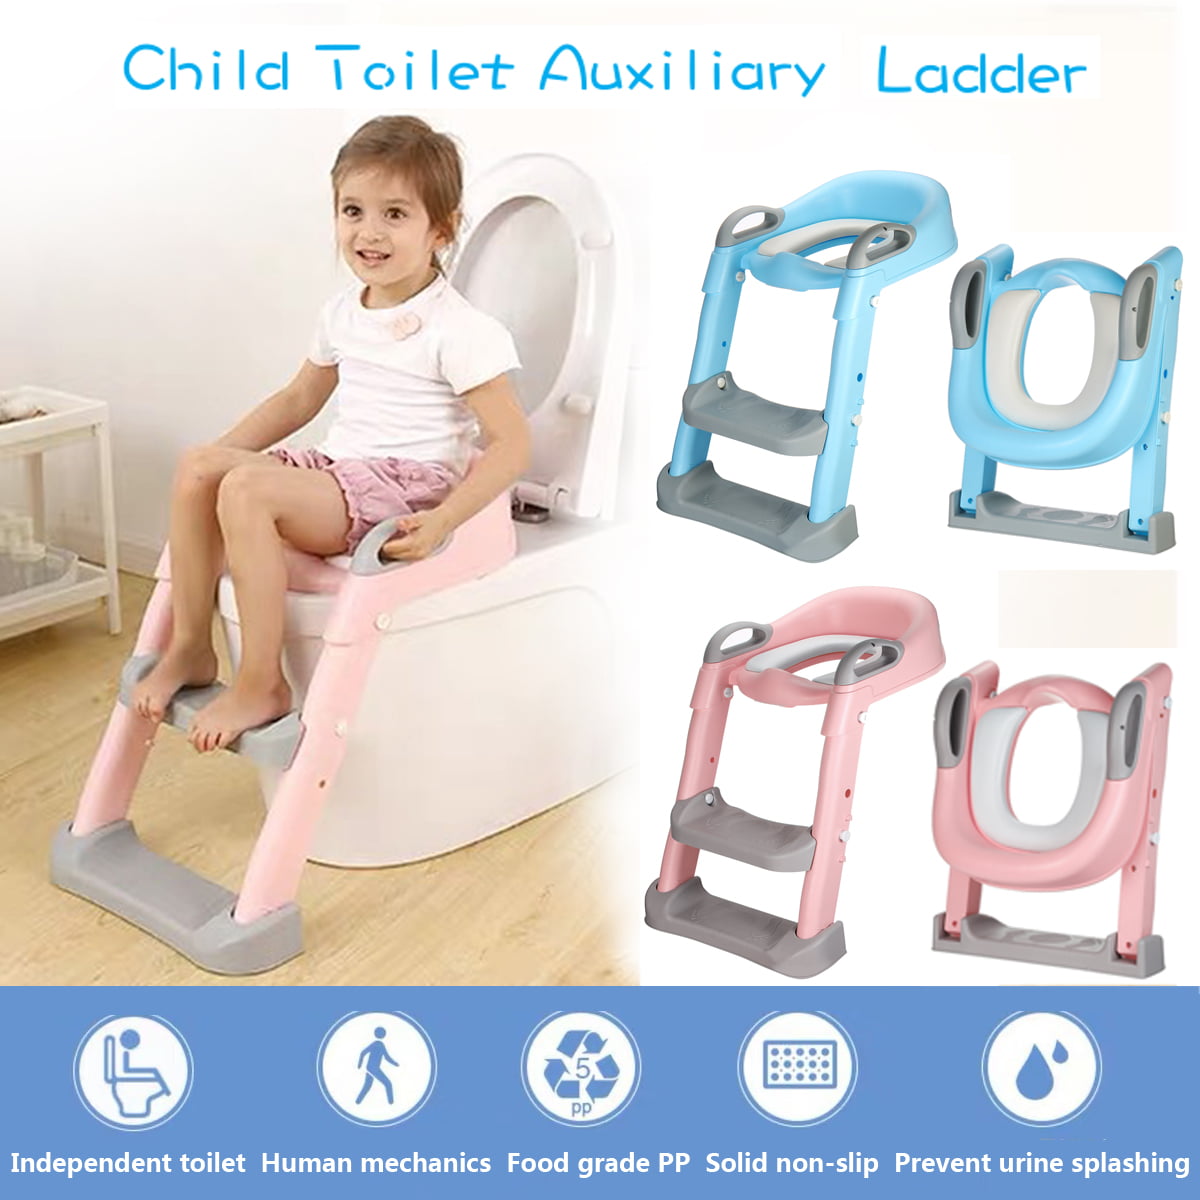 Toddlers Comfortable Toilet Chair with Anti-Slip Pads and Safe Handle Blue Soft Cushion Toilet Training Seat for Boys Girls Potty Training Toilet Seat for Kids with Step Stool Ladder 